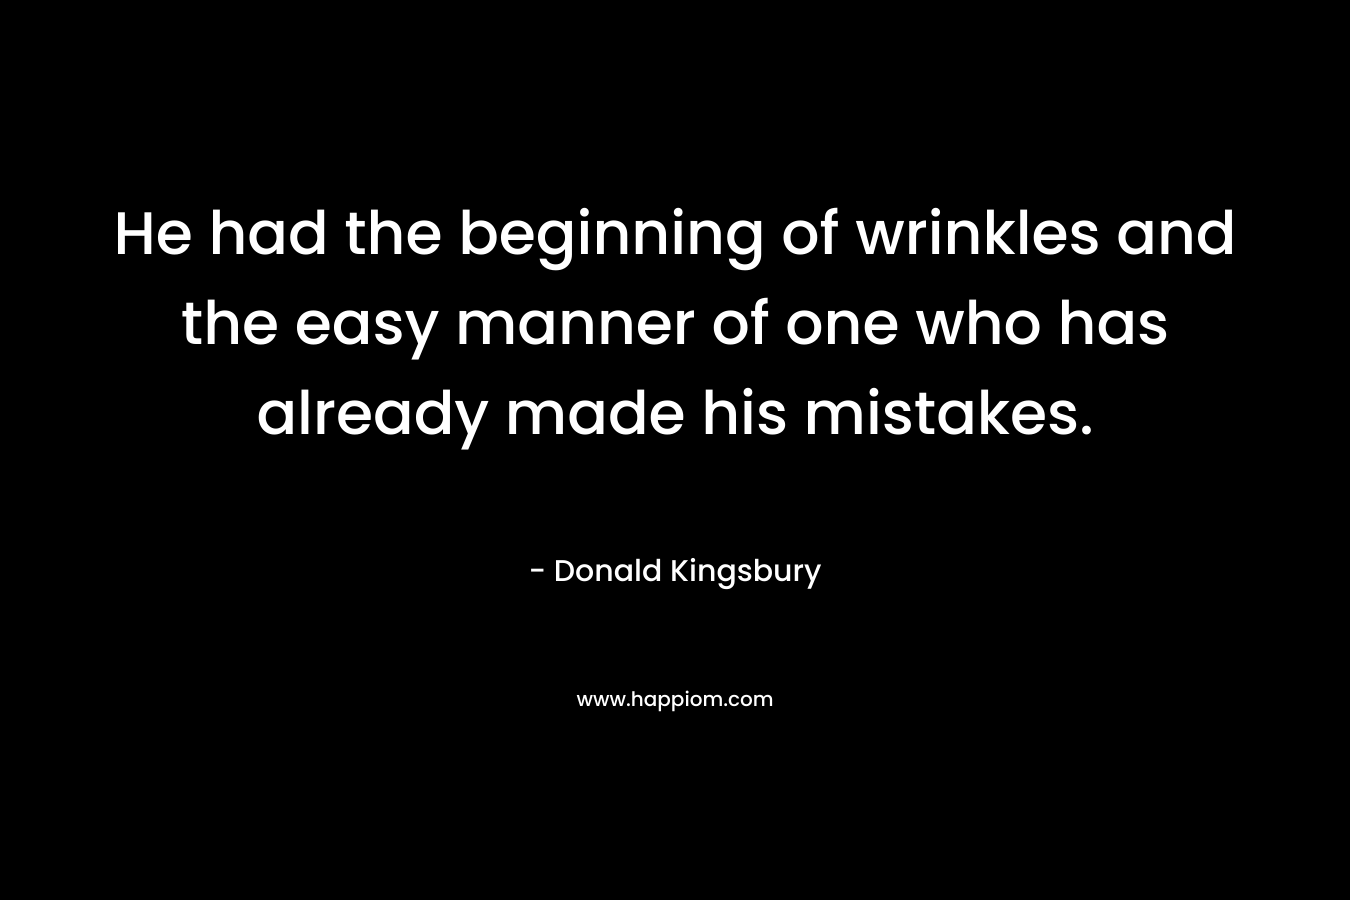 He had the beginning of wrinkles and the easy manner of one who has already made his mistakes. – Donald Kingsbury